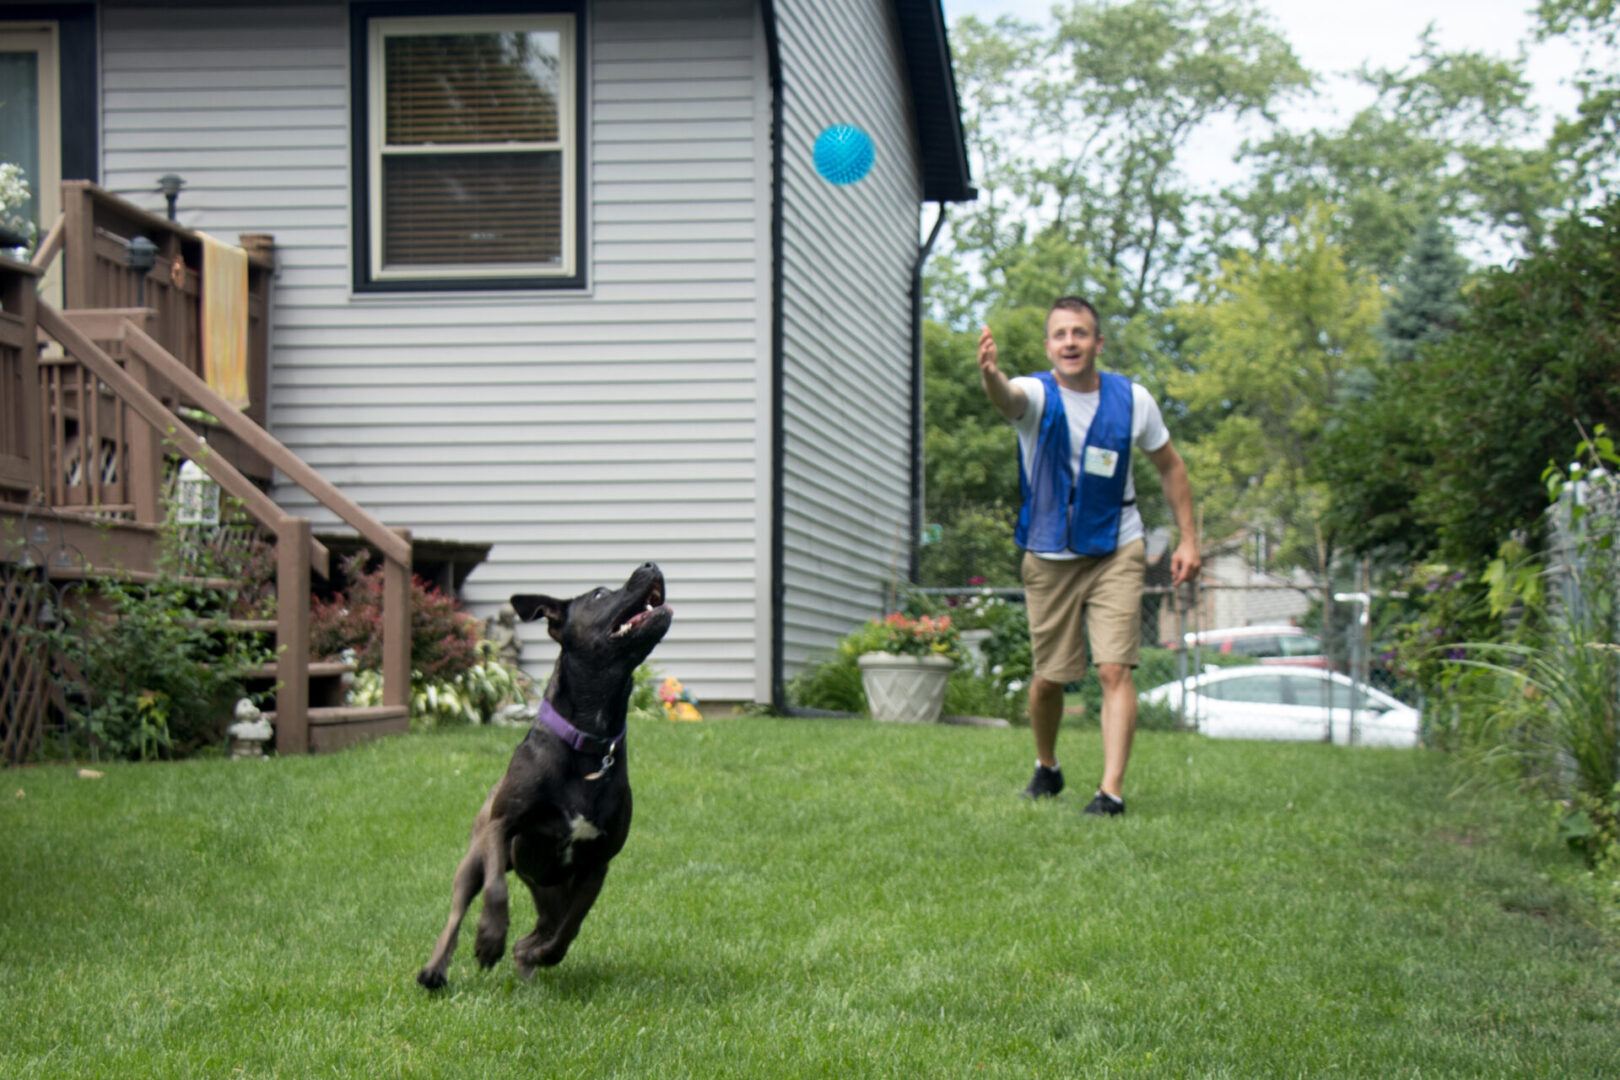 #A man and his dog playing with a frisbee.